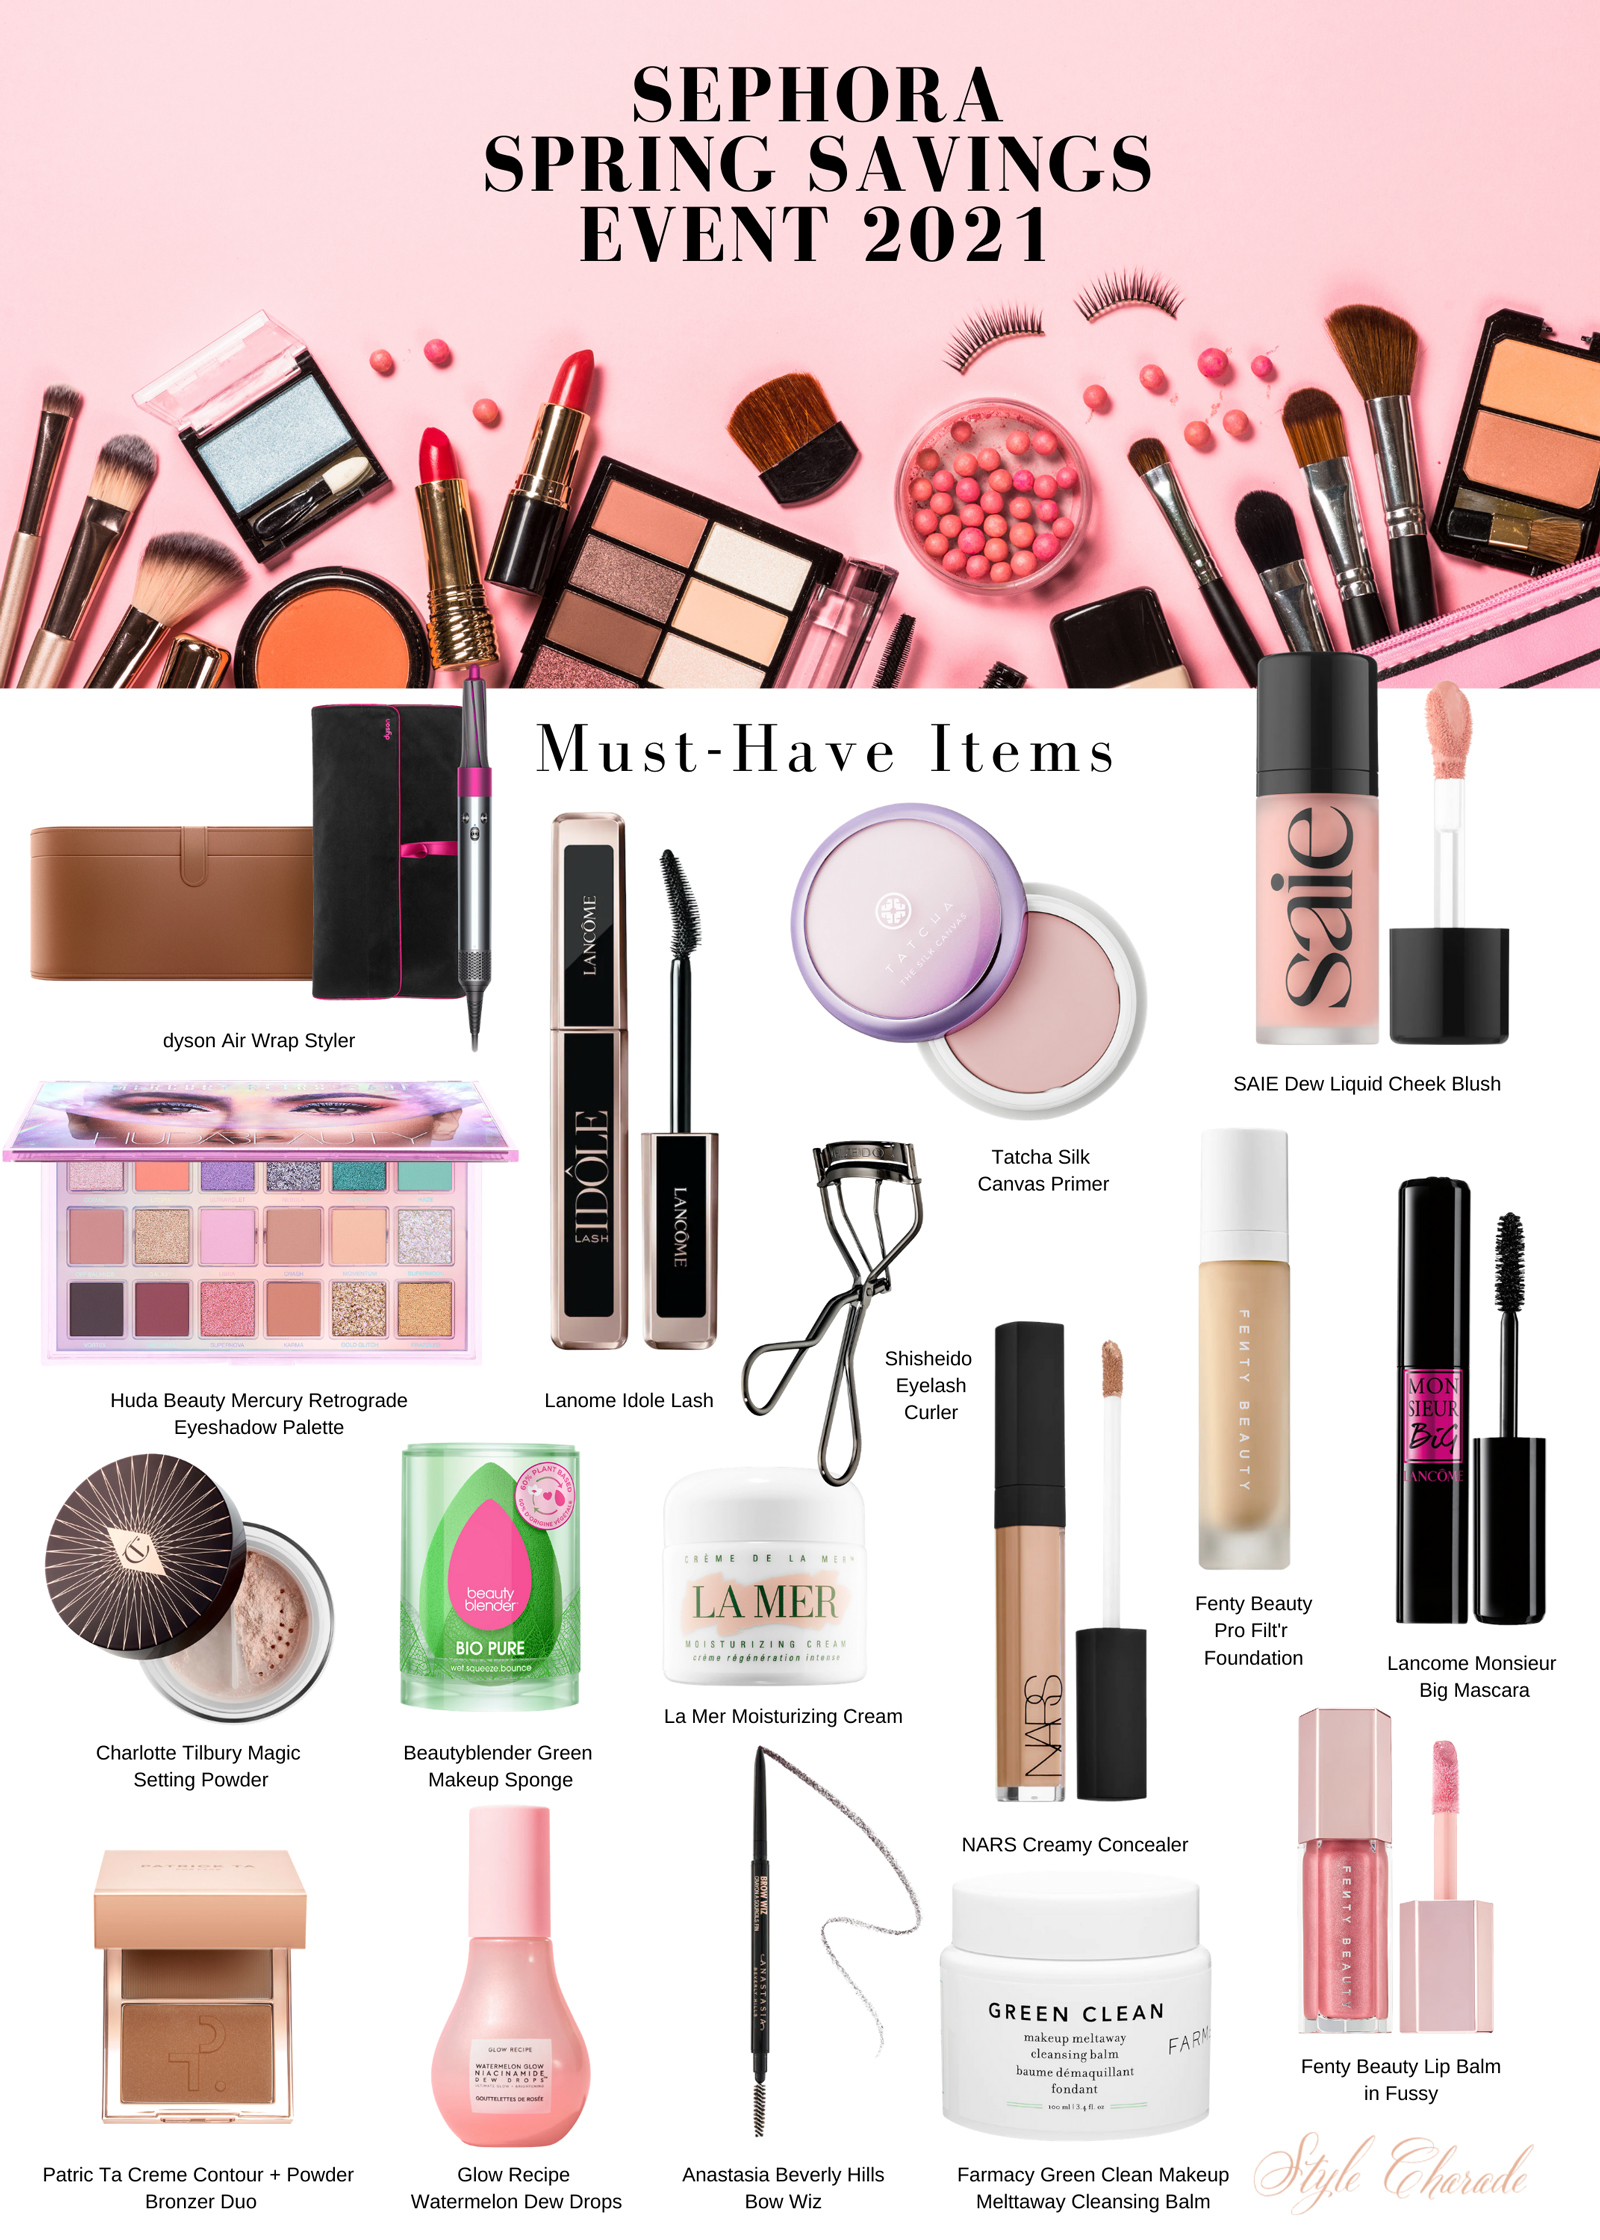 Most Popular Makeup Products at Sephora 2020